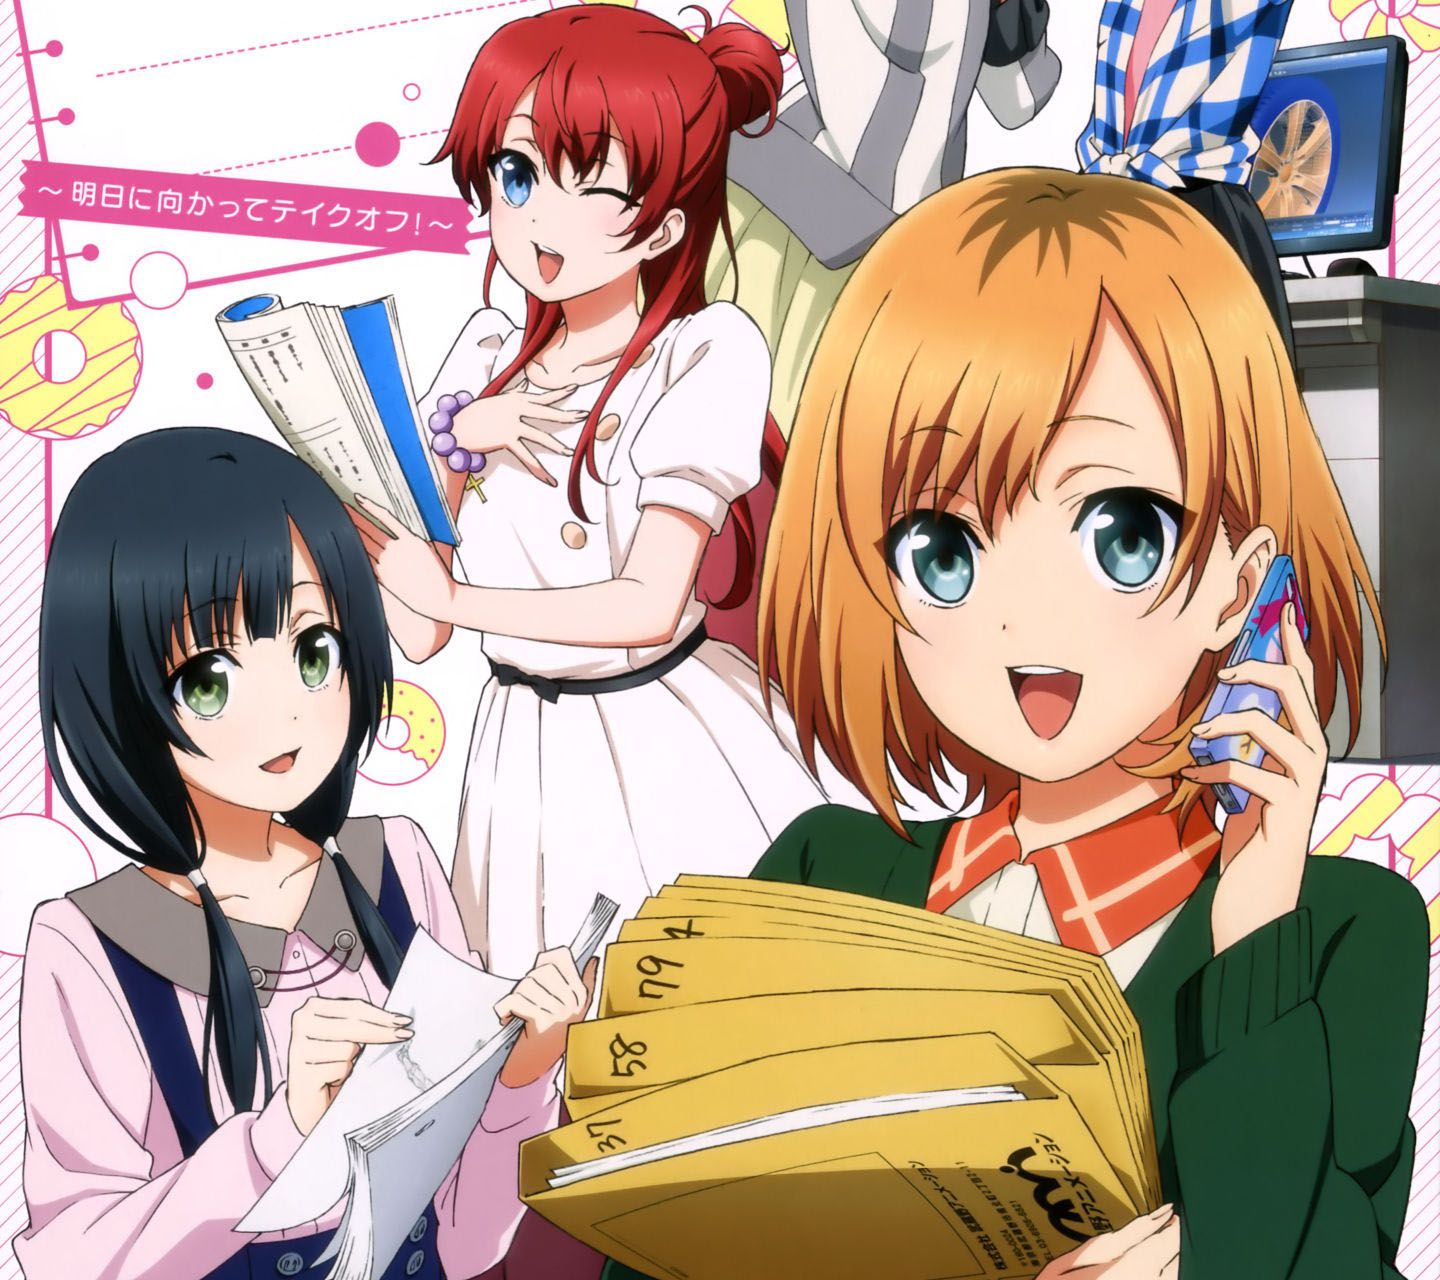 Shirobako Android壁紙 2 アニメ壁紙ネット Pc Android Iphone壁紙 画像